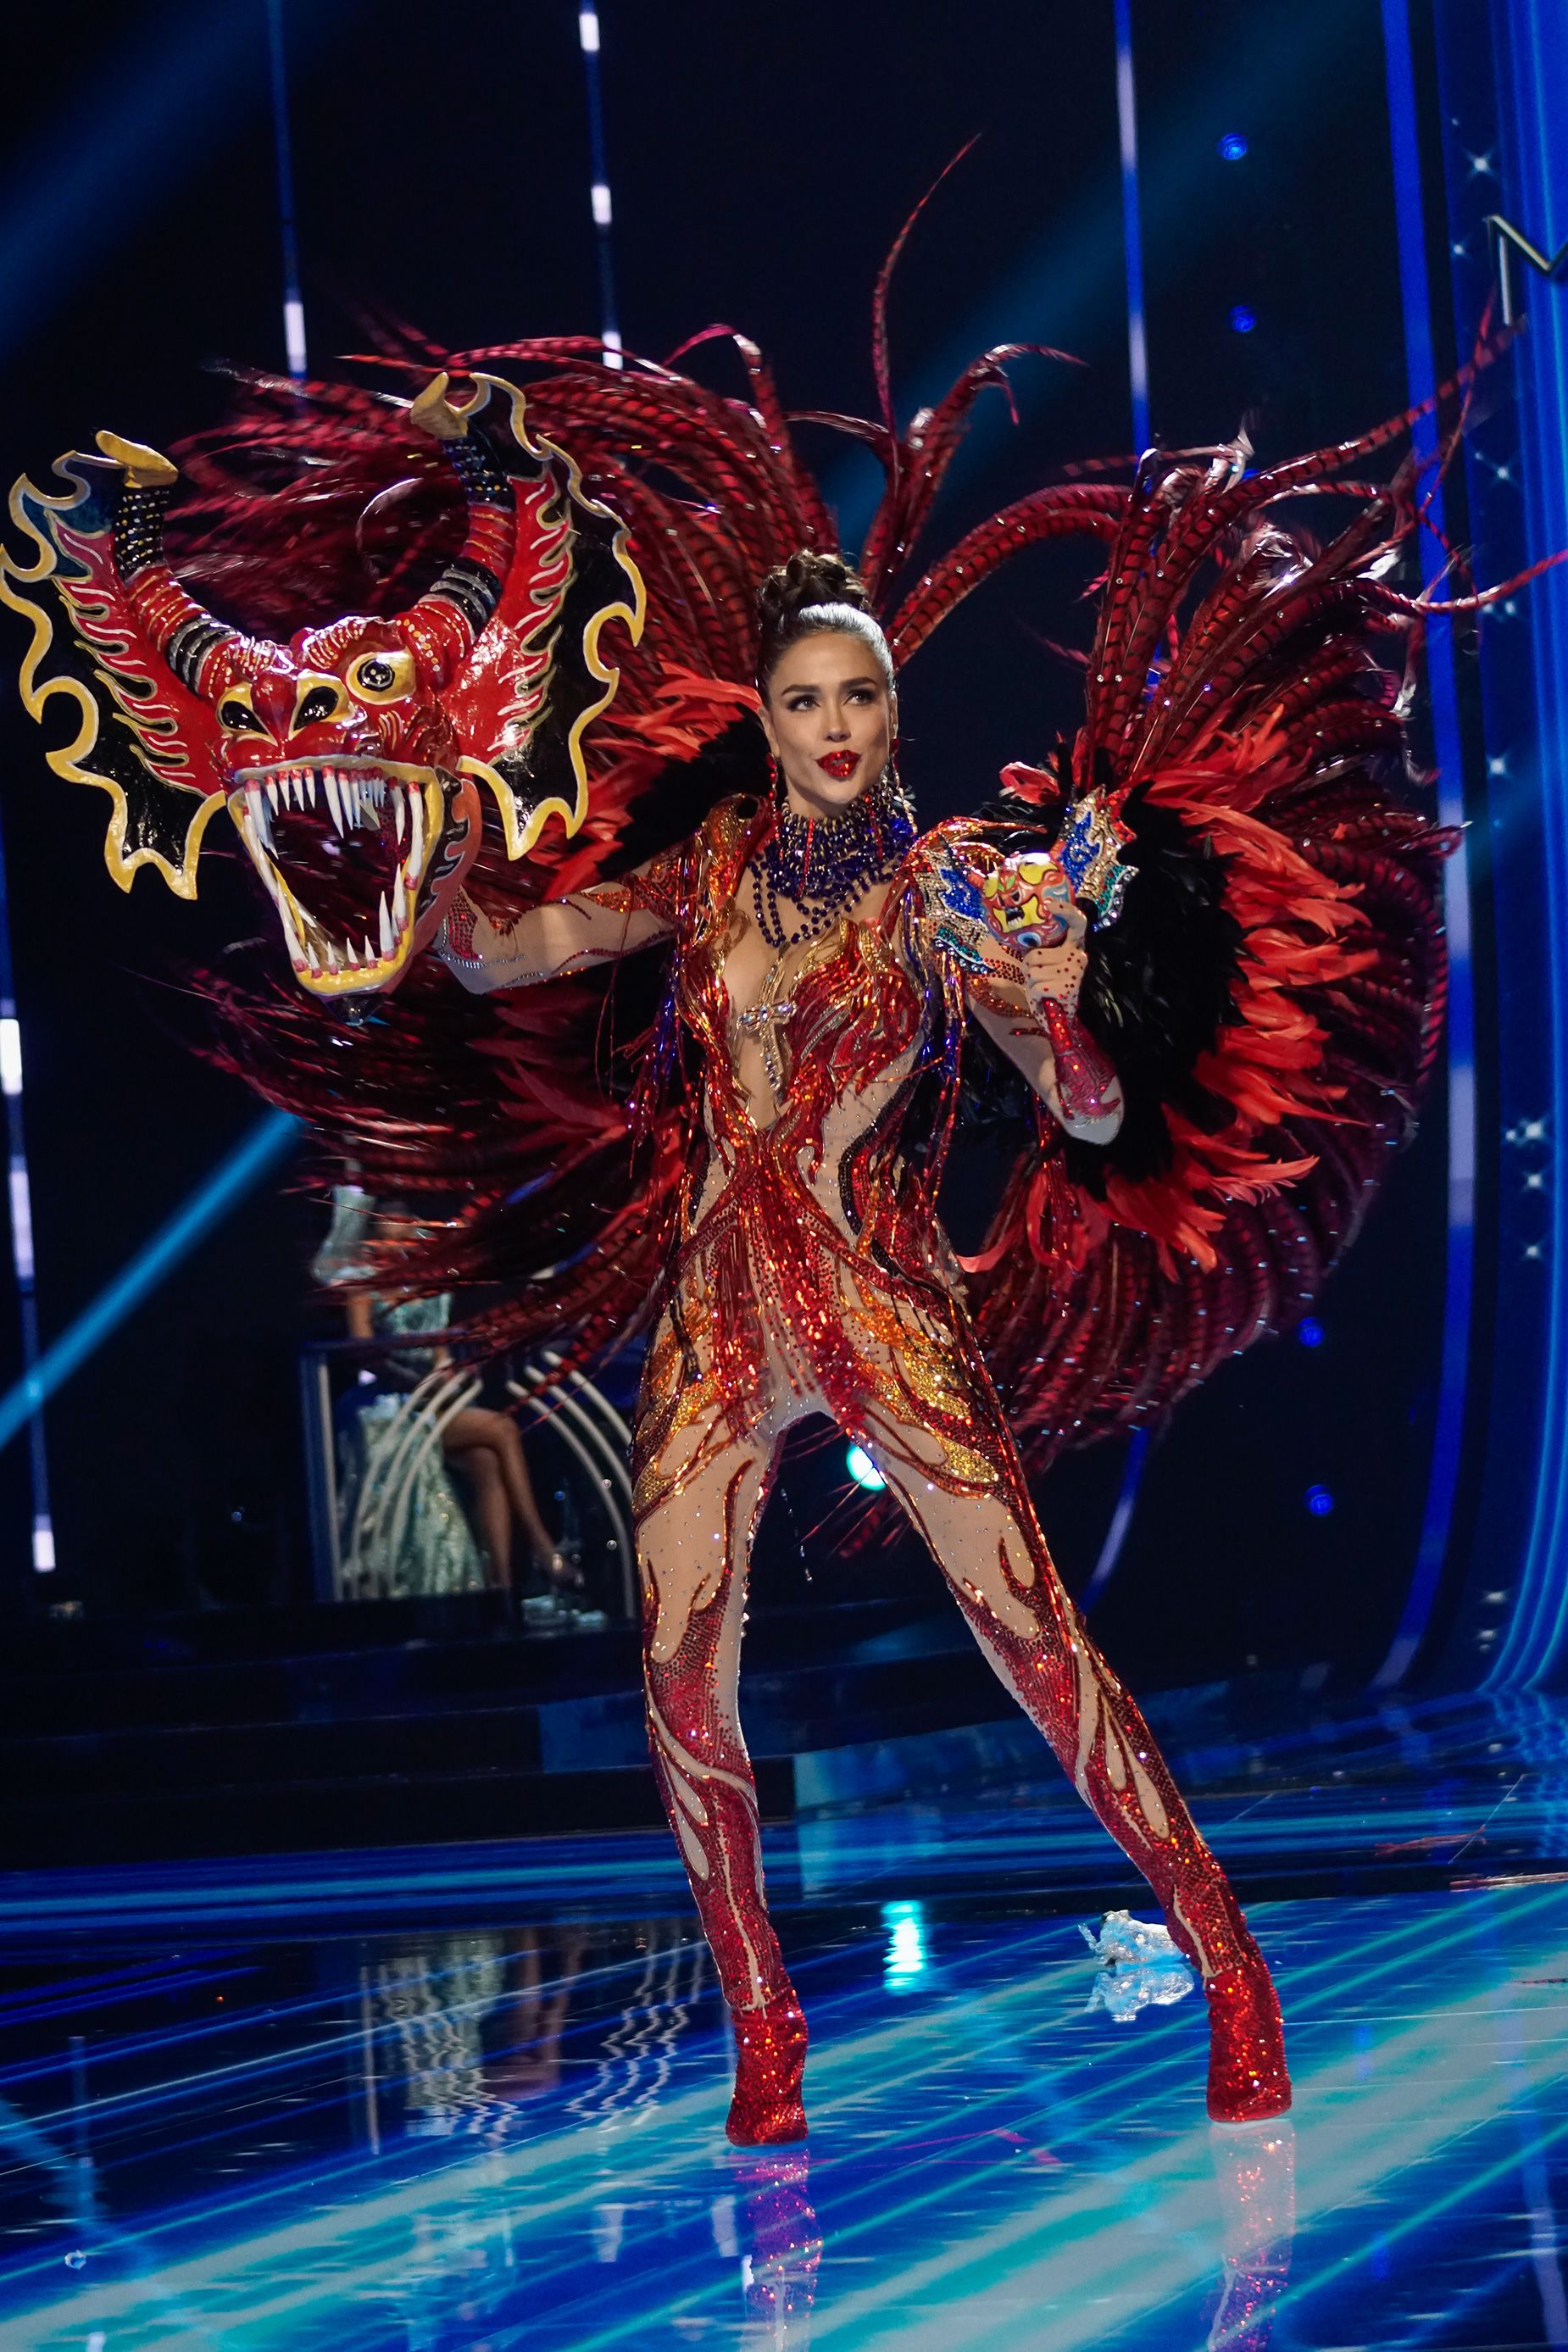 Miss Venezuela's costume paid tribute to the dancing devils, otherwise known as spirit dancers, who perform at religious festivals in her country.